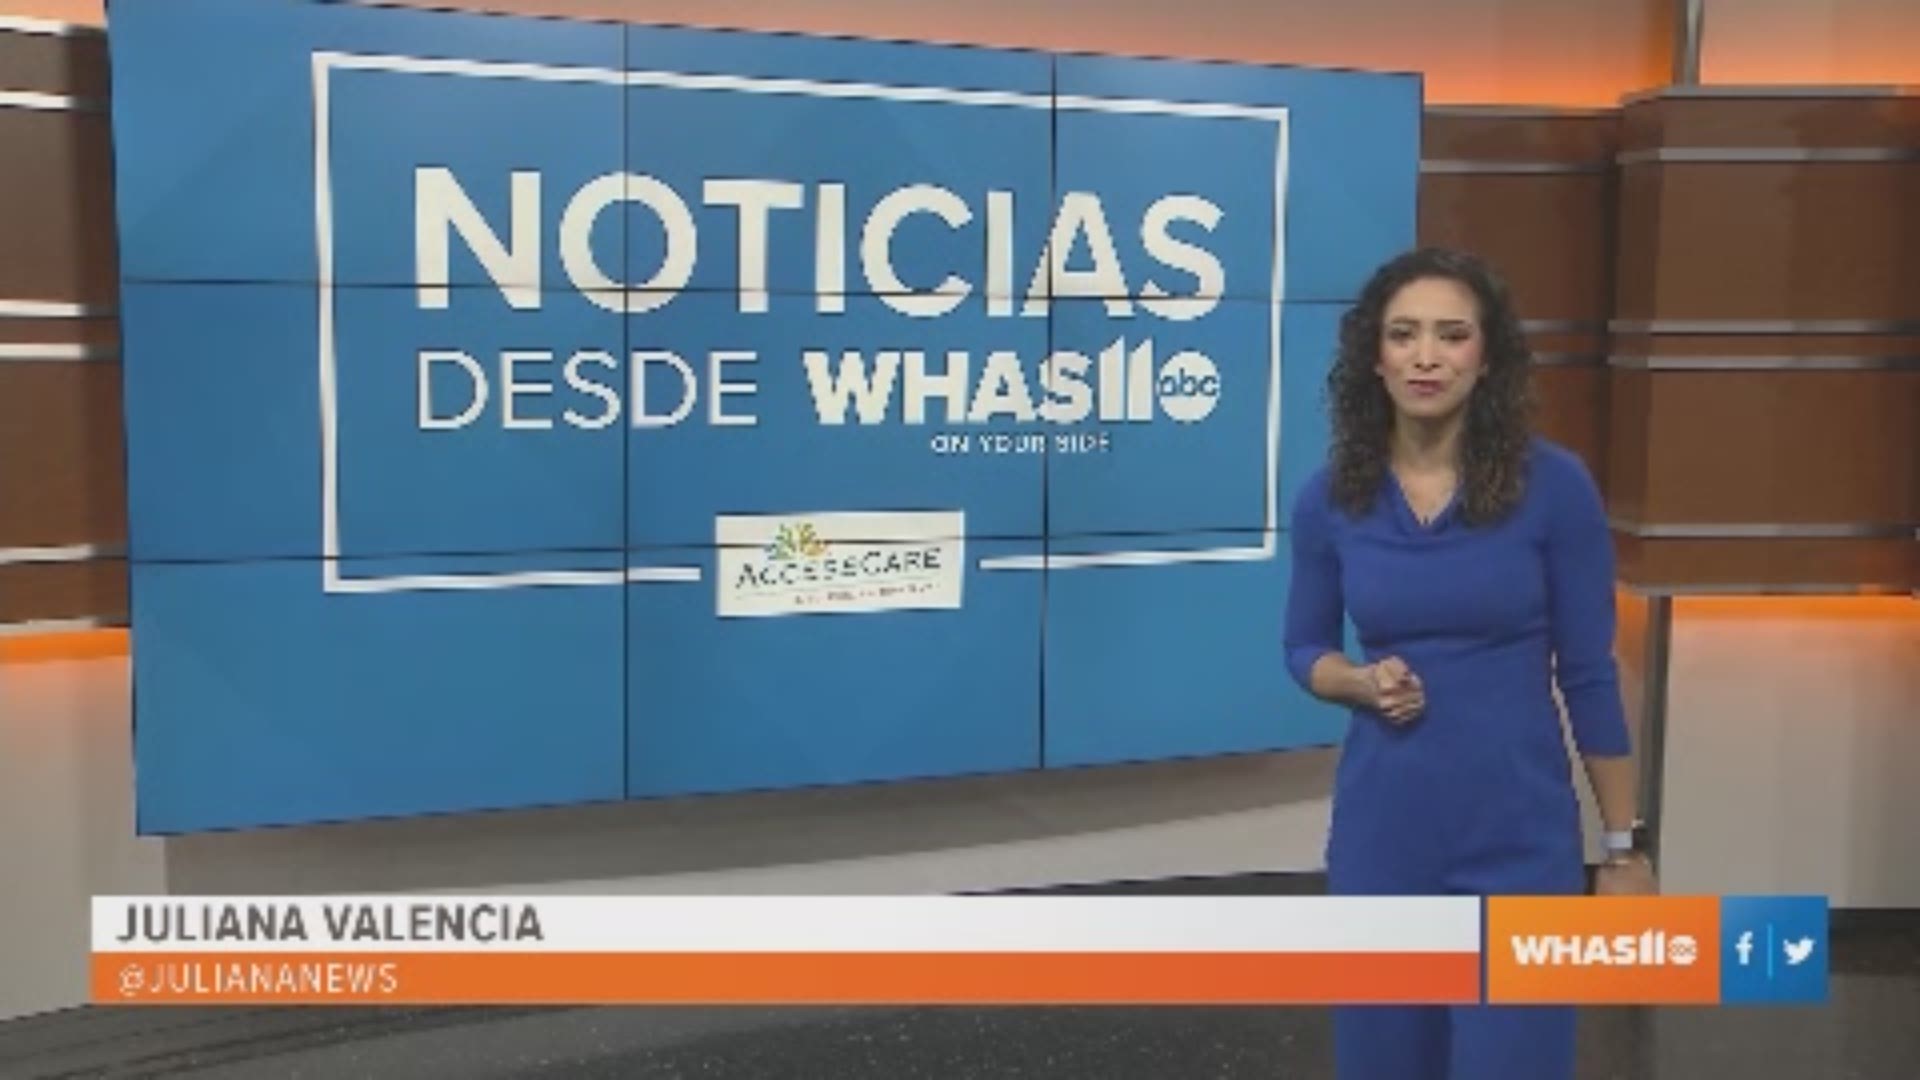 The news of the day in Spanish for Tuesday, January 22, 2019